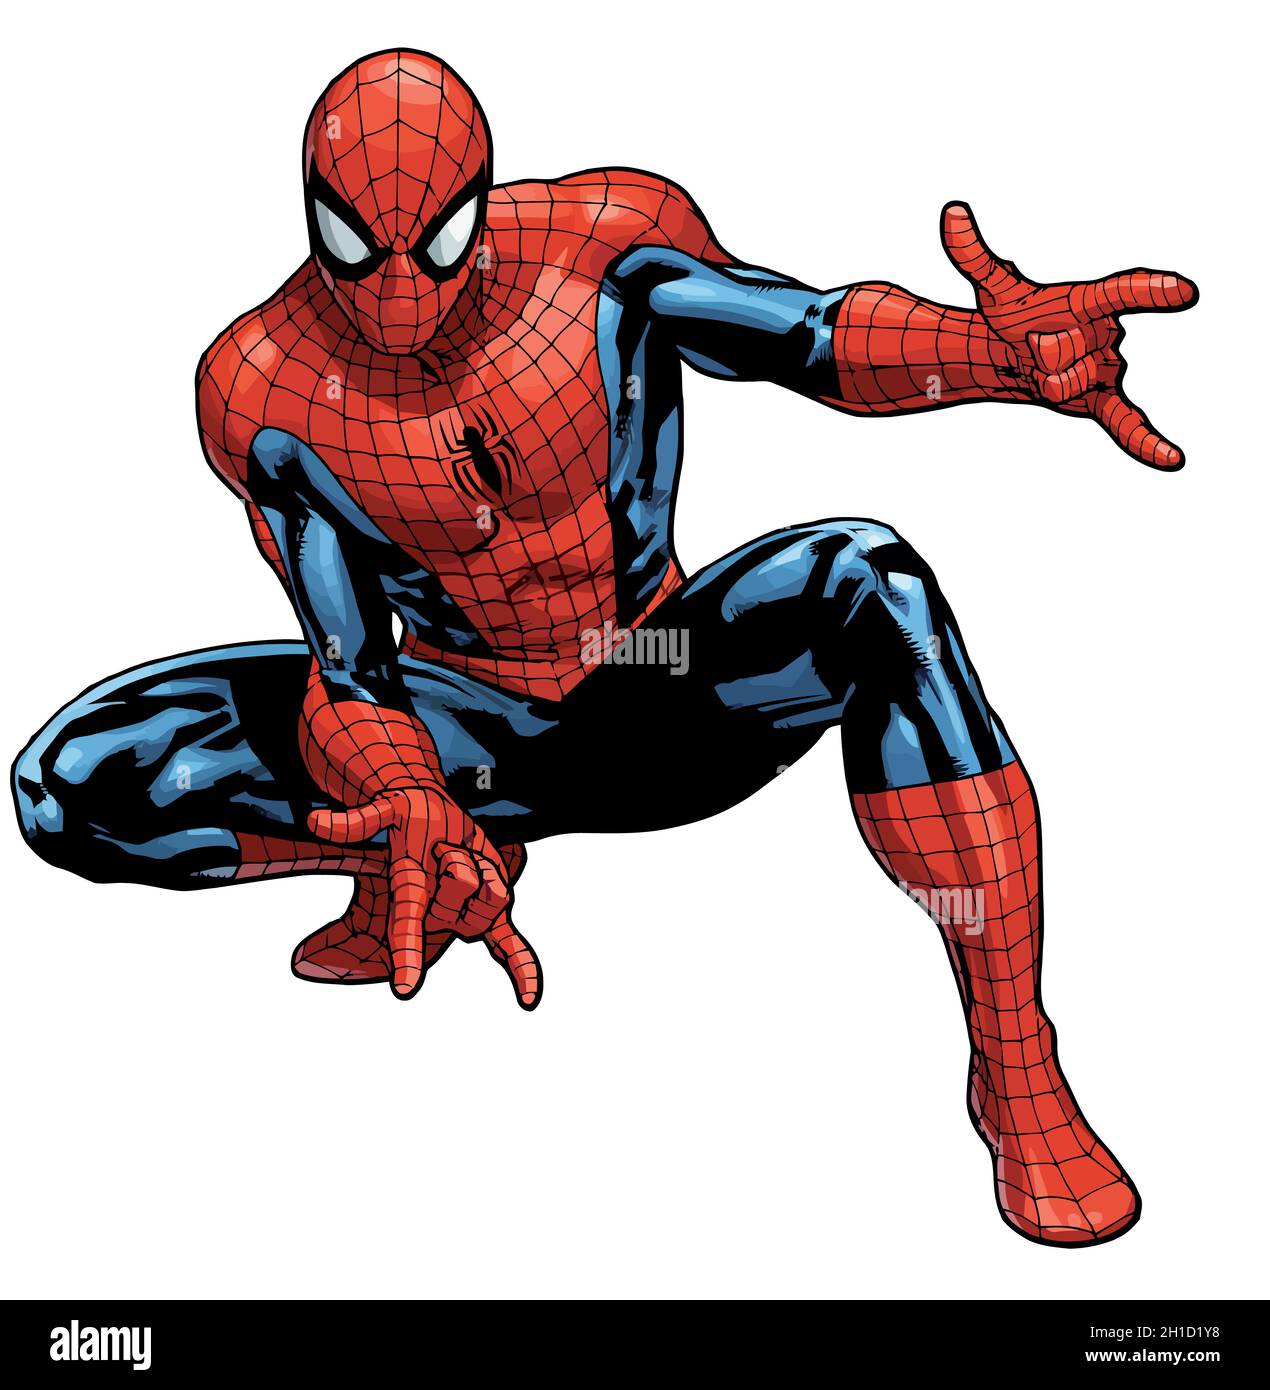 Spiderman Cut Out Stock Images & Pictures - Alamy